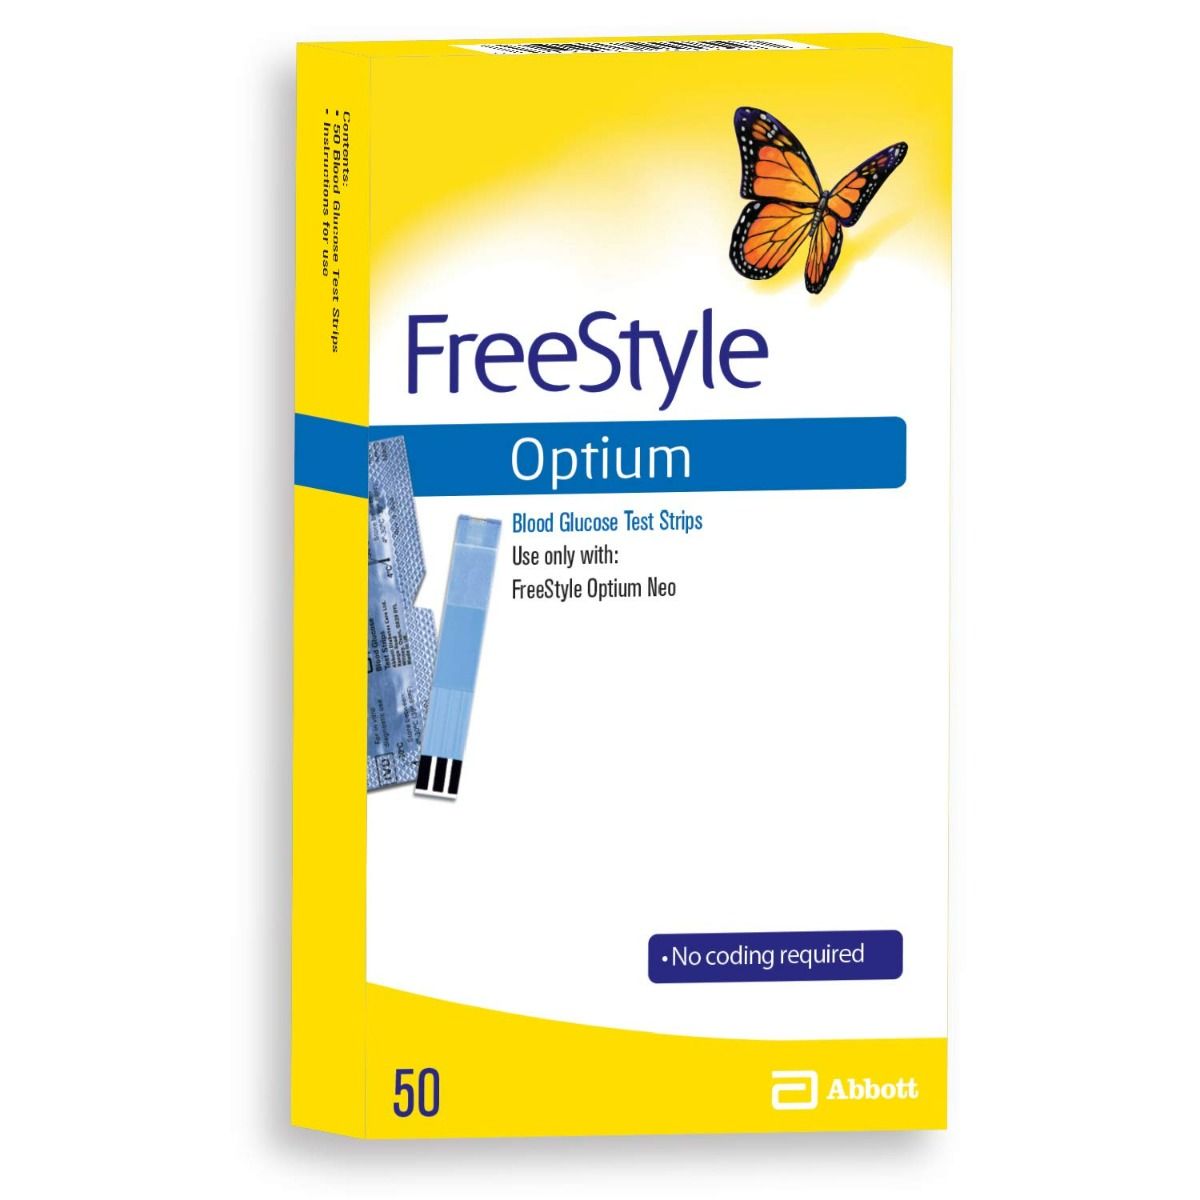 FreeStyle Optium Blood Glucose Test Strips, 50 Count, Pack of 1 